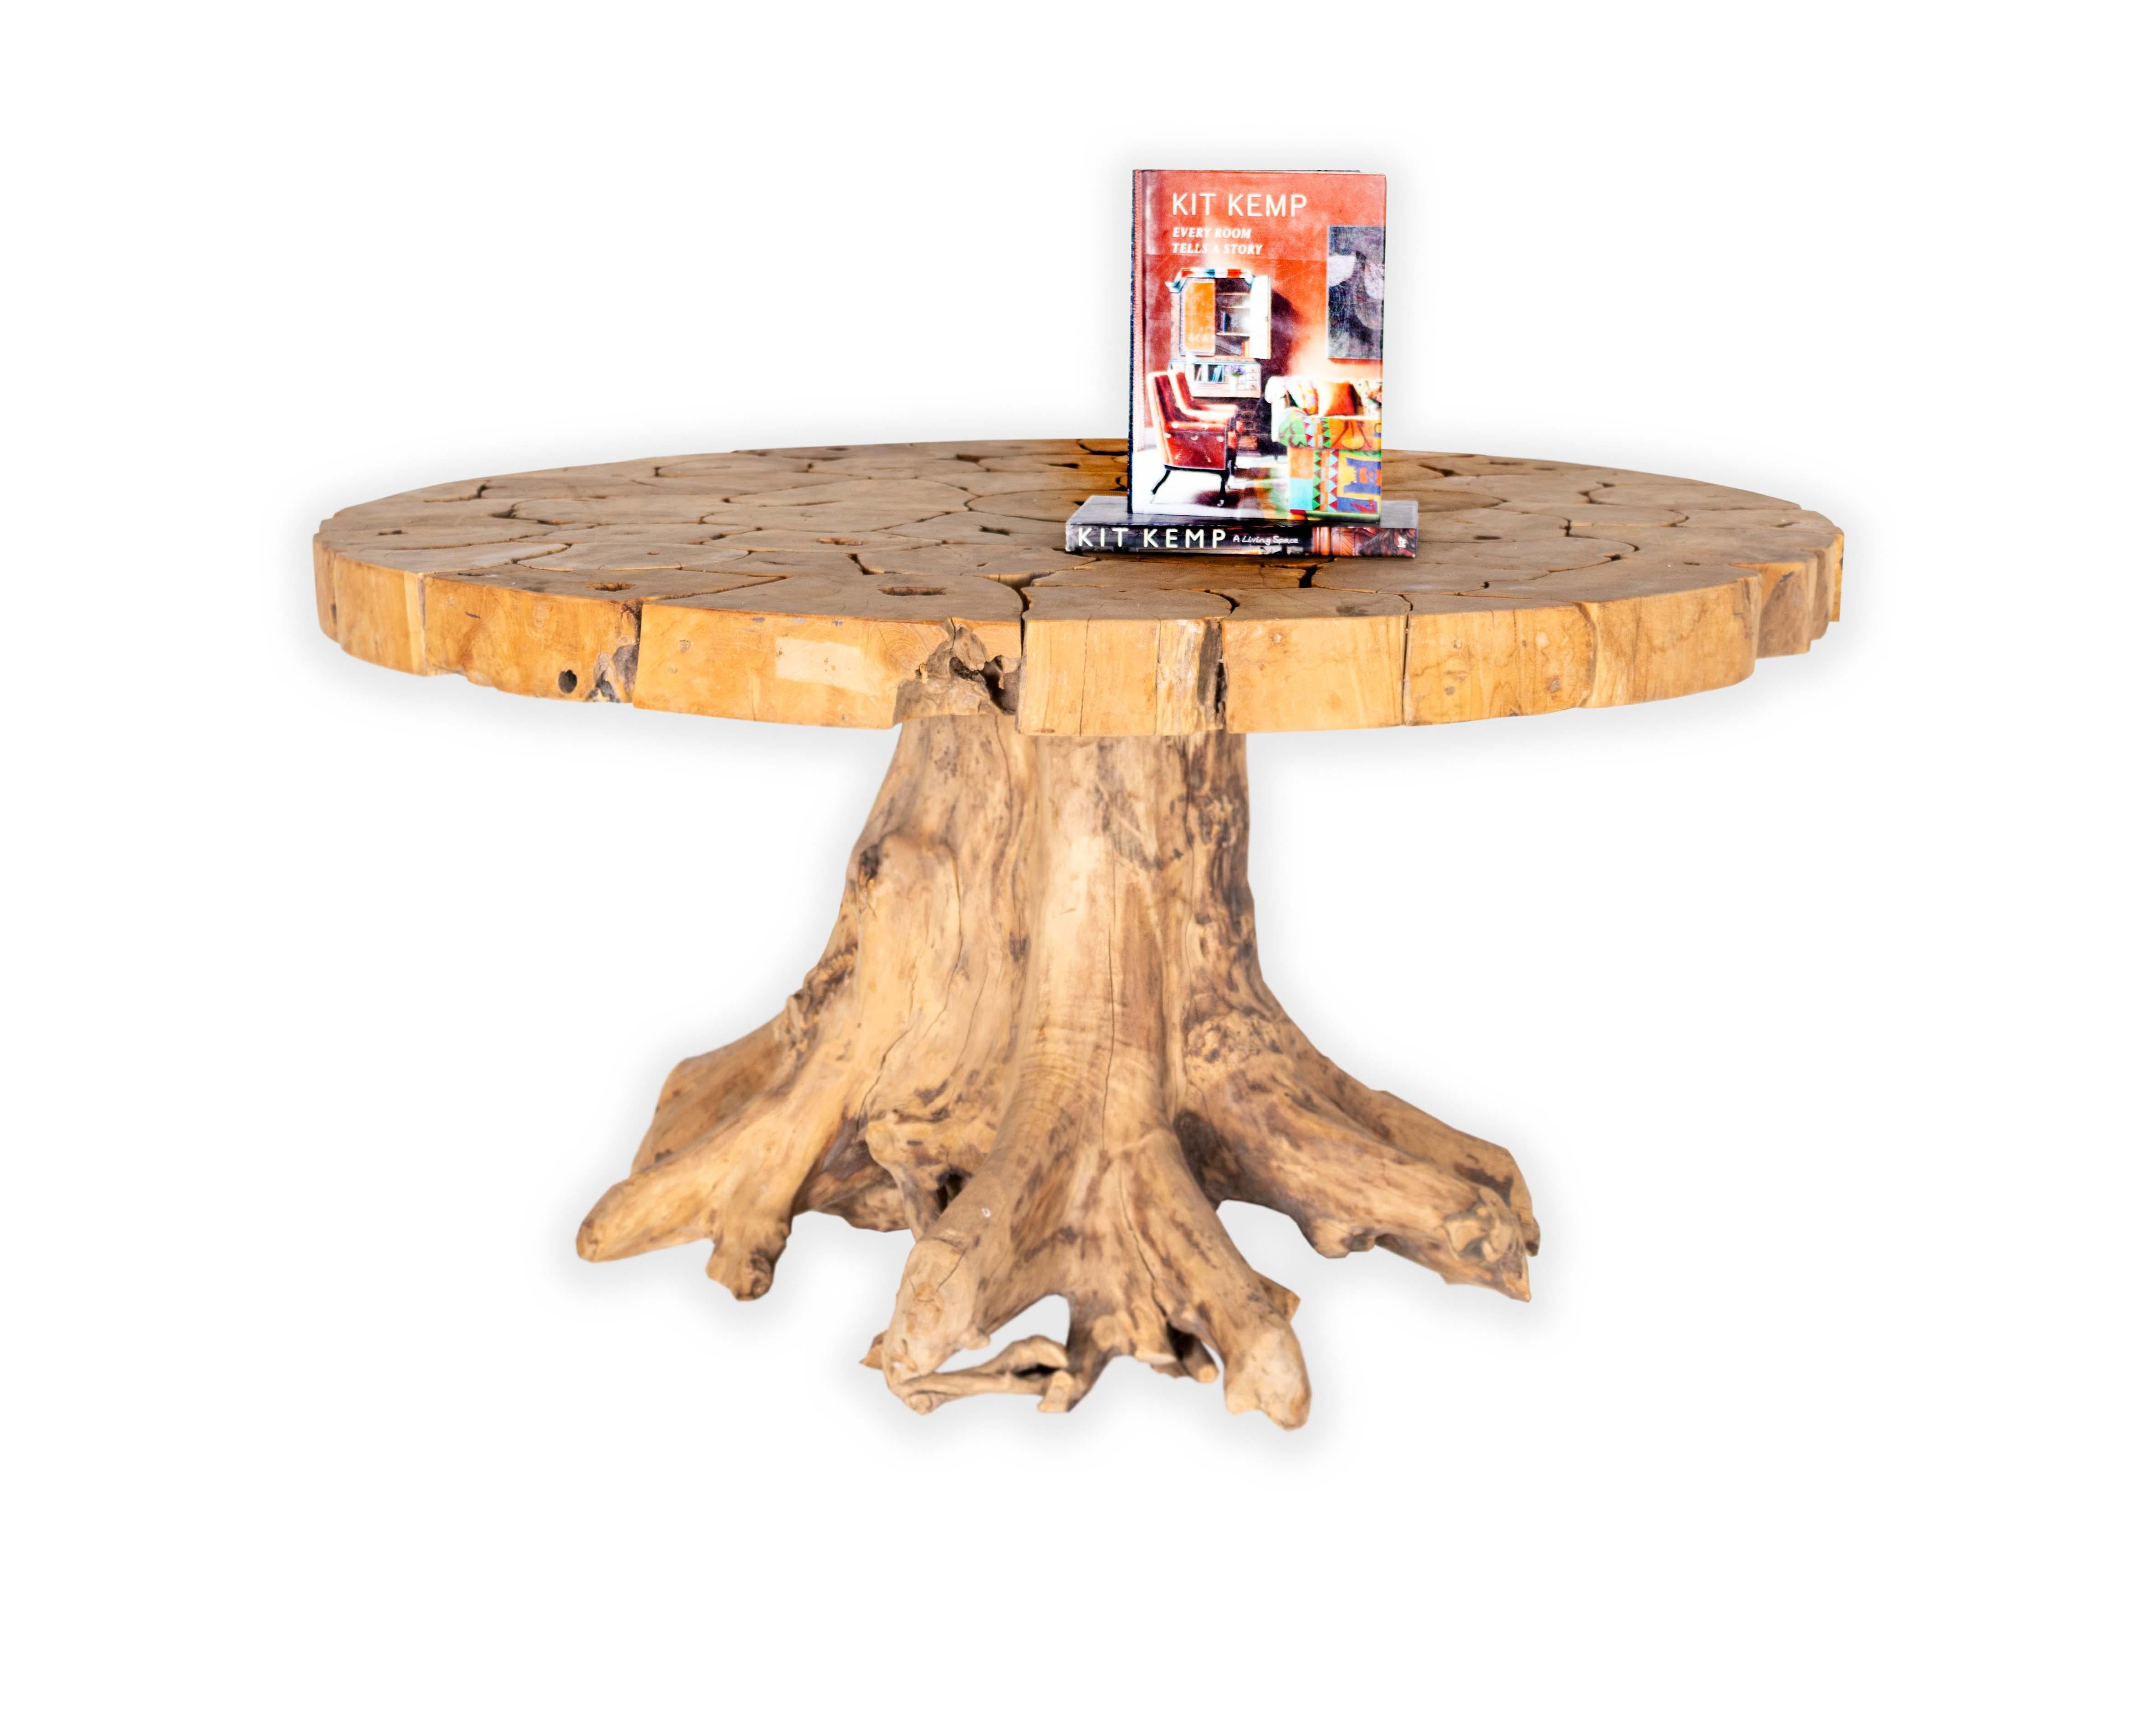 Organic form teak dining table with teak slice top.

This item is crafted from natural materials. Coloring and detailing may vary, adding to its uniqueness.

Item from our one of a kind collection, Le Monde, exclusive to Brendan